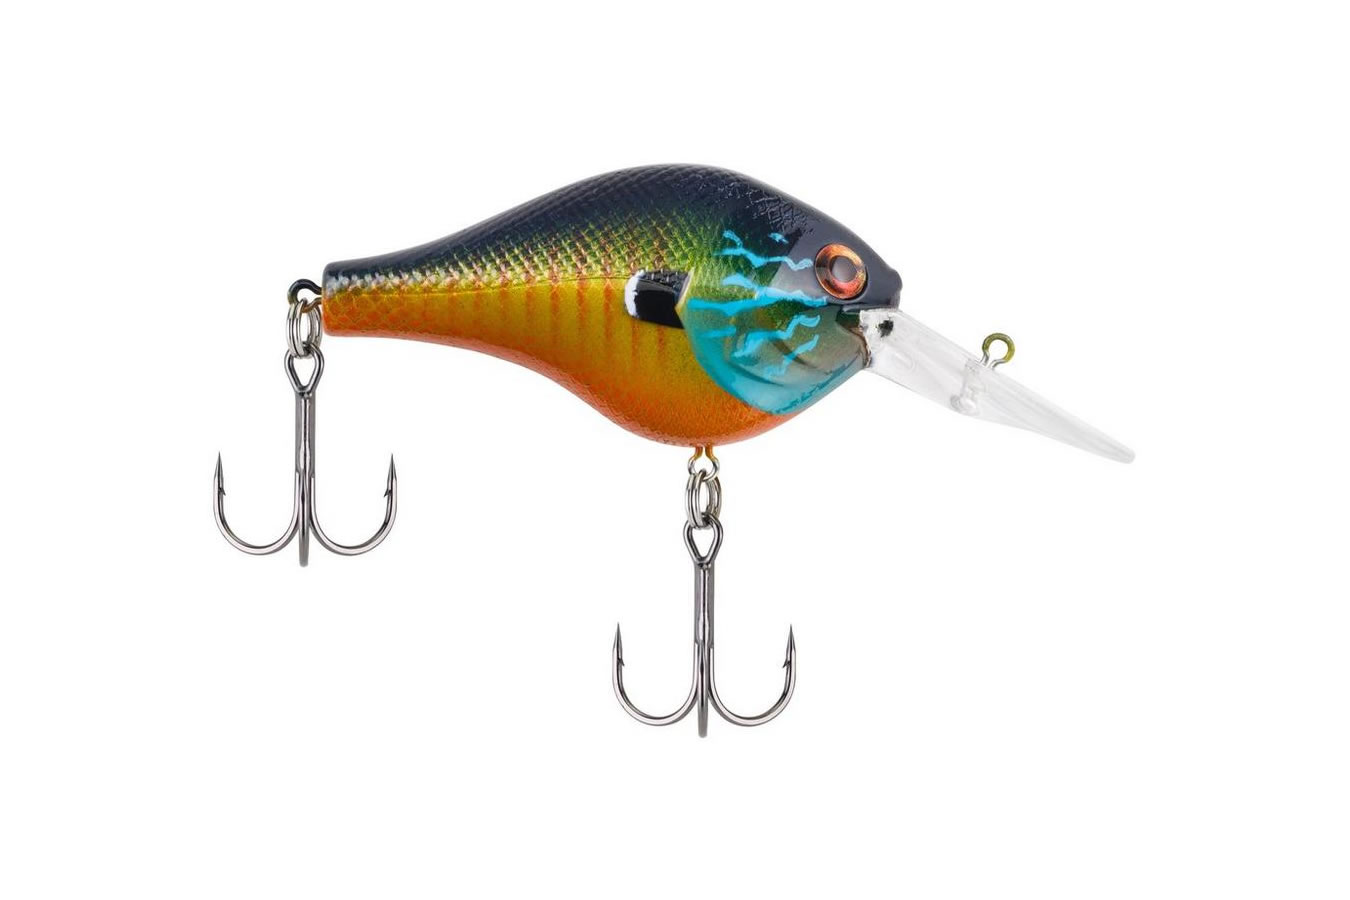 Discount Berkley Digger 8.5 Gilly for Sale, Online Fishing Baits Store